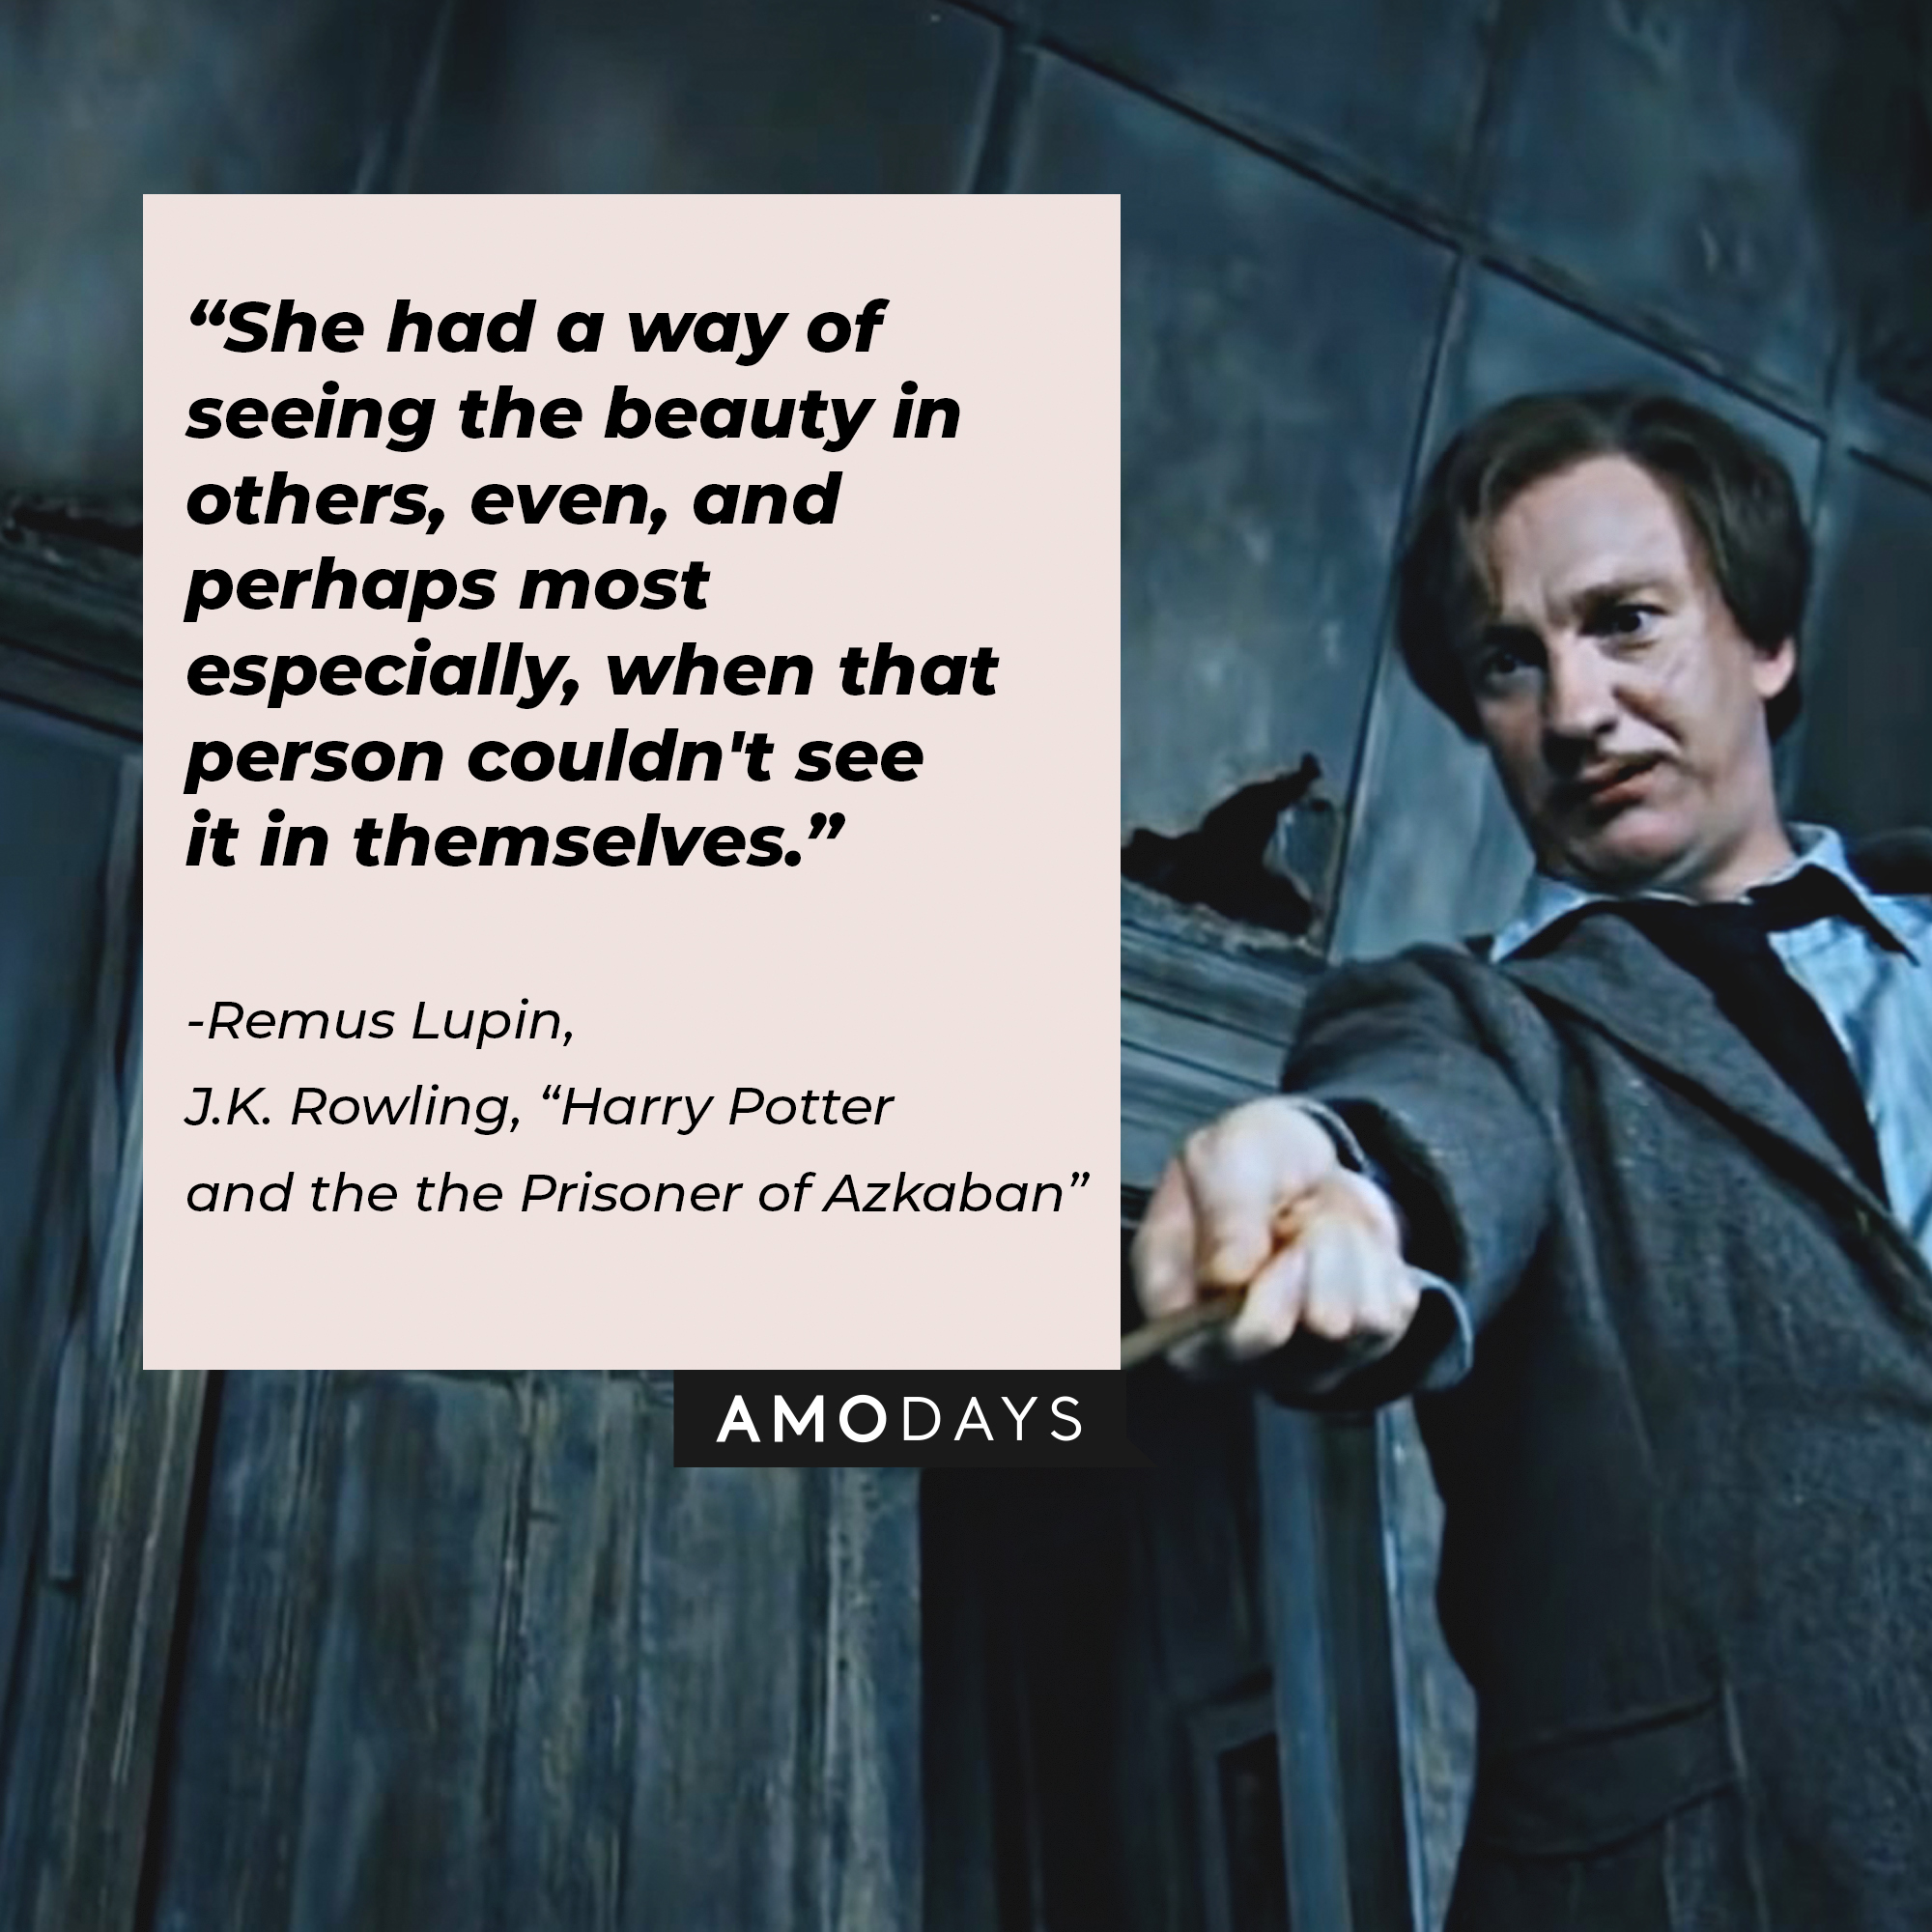 A picture of Remus Lupin with his quote: “She had a way of seeing the beauty in others, even, and perhaps most especially, when that person couldn't see it in themselves.” | Source: youtube.com/WarnerBrosPictures